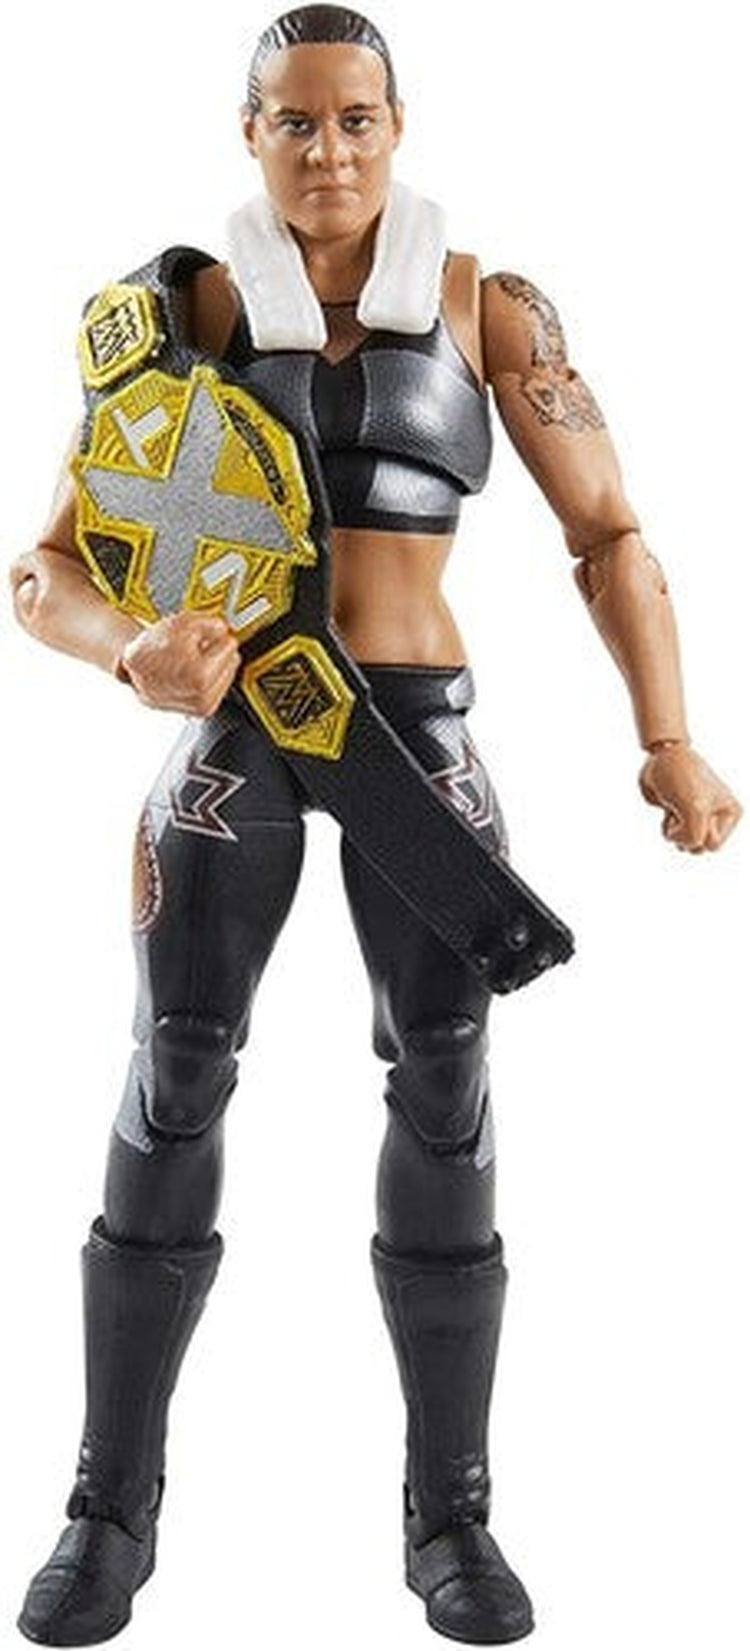 Mattel Collectible - WWE Elite Collection Fan Takeover Shayna Baszler